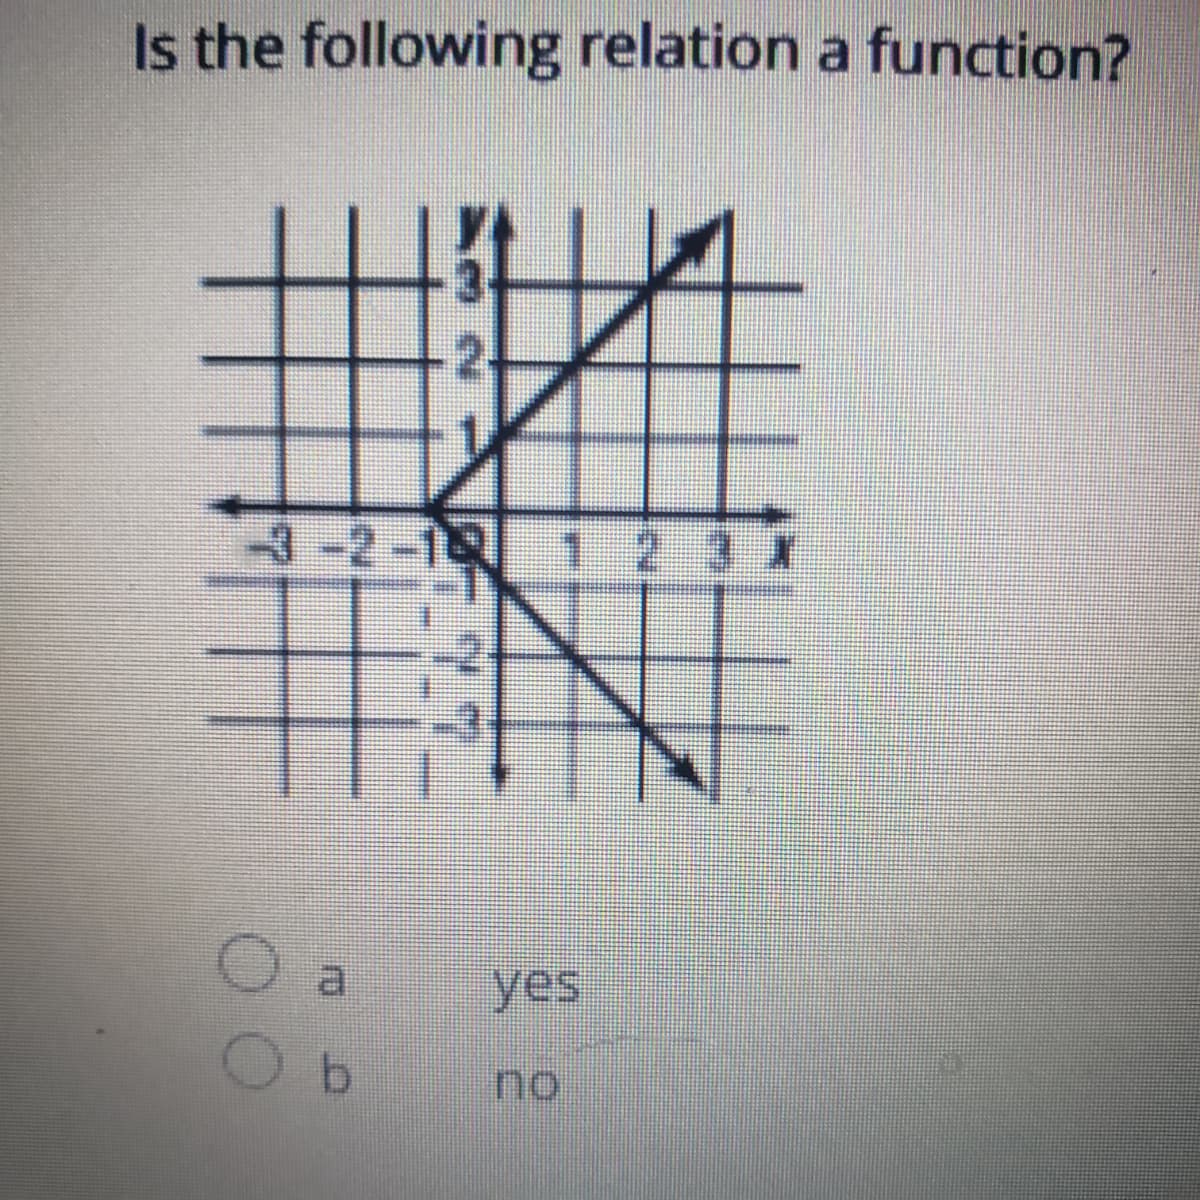 Is the following relation a function?
3-2-1 1 2 3 X
a.
yes
no
